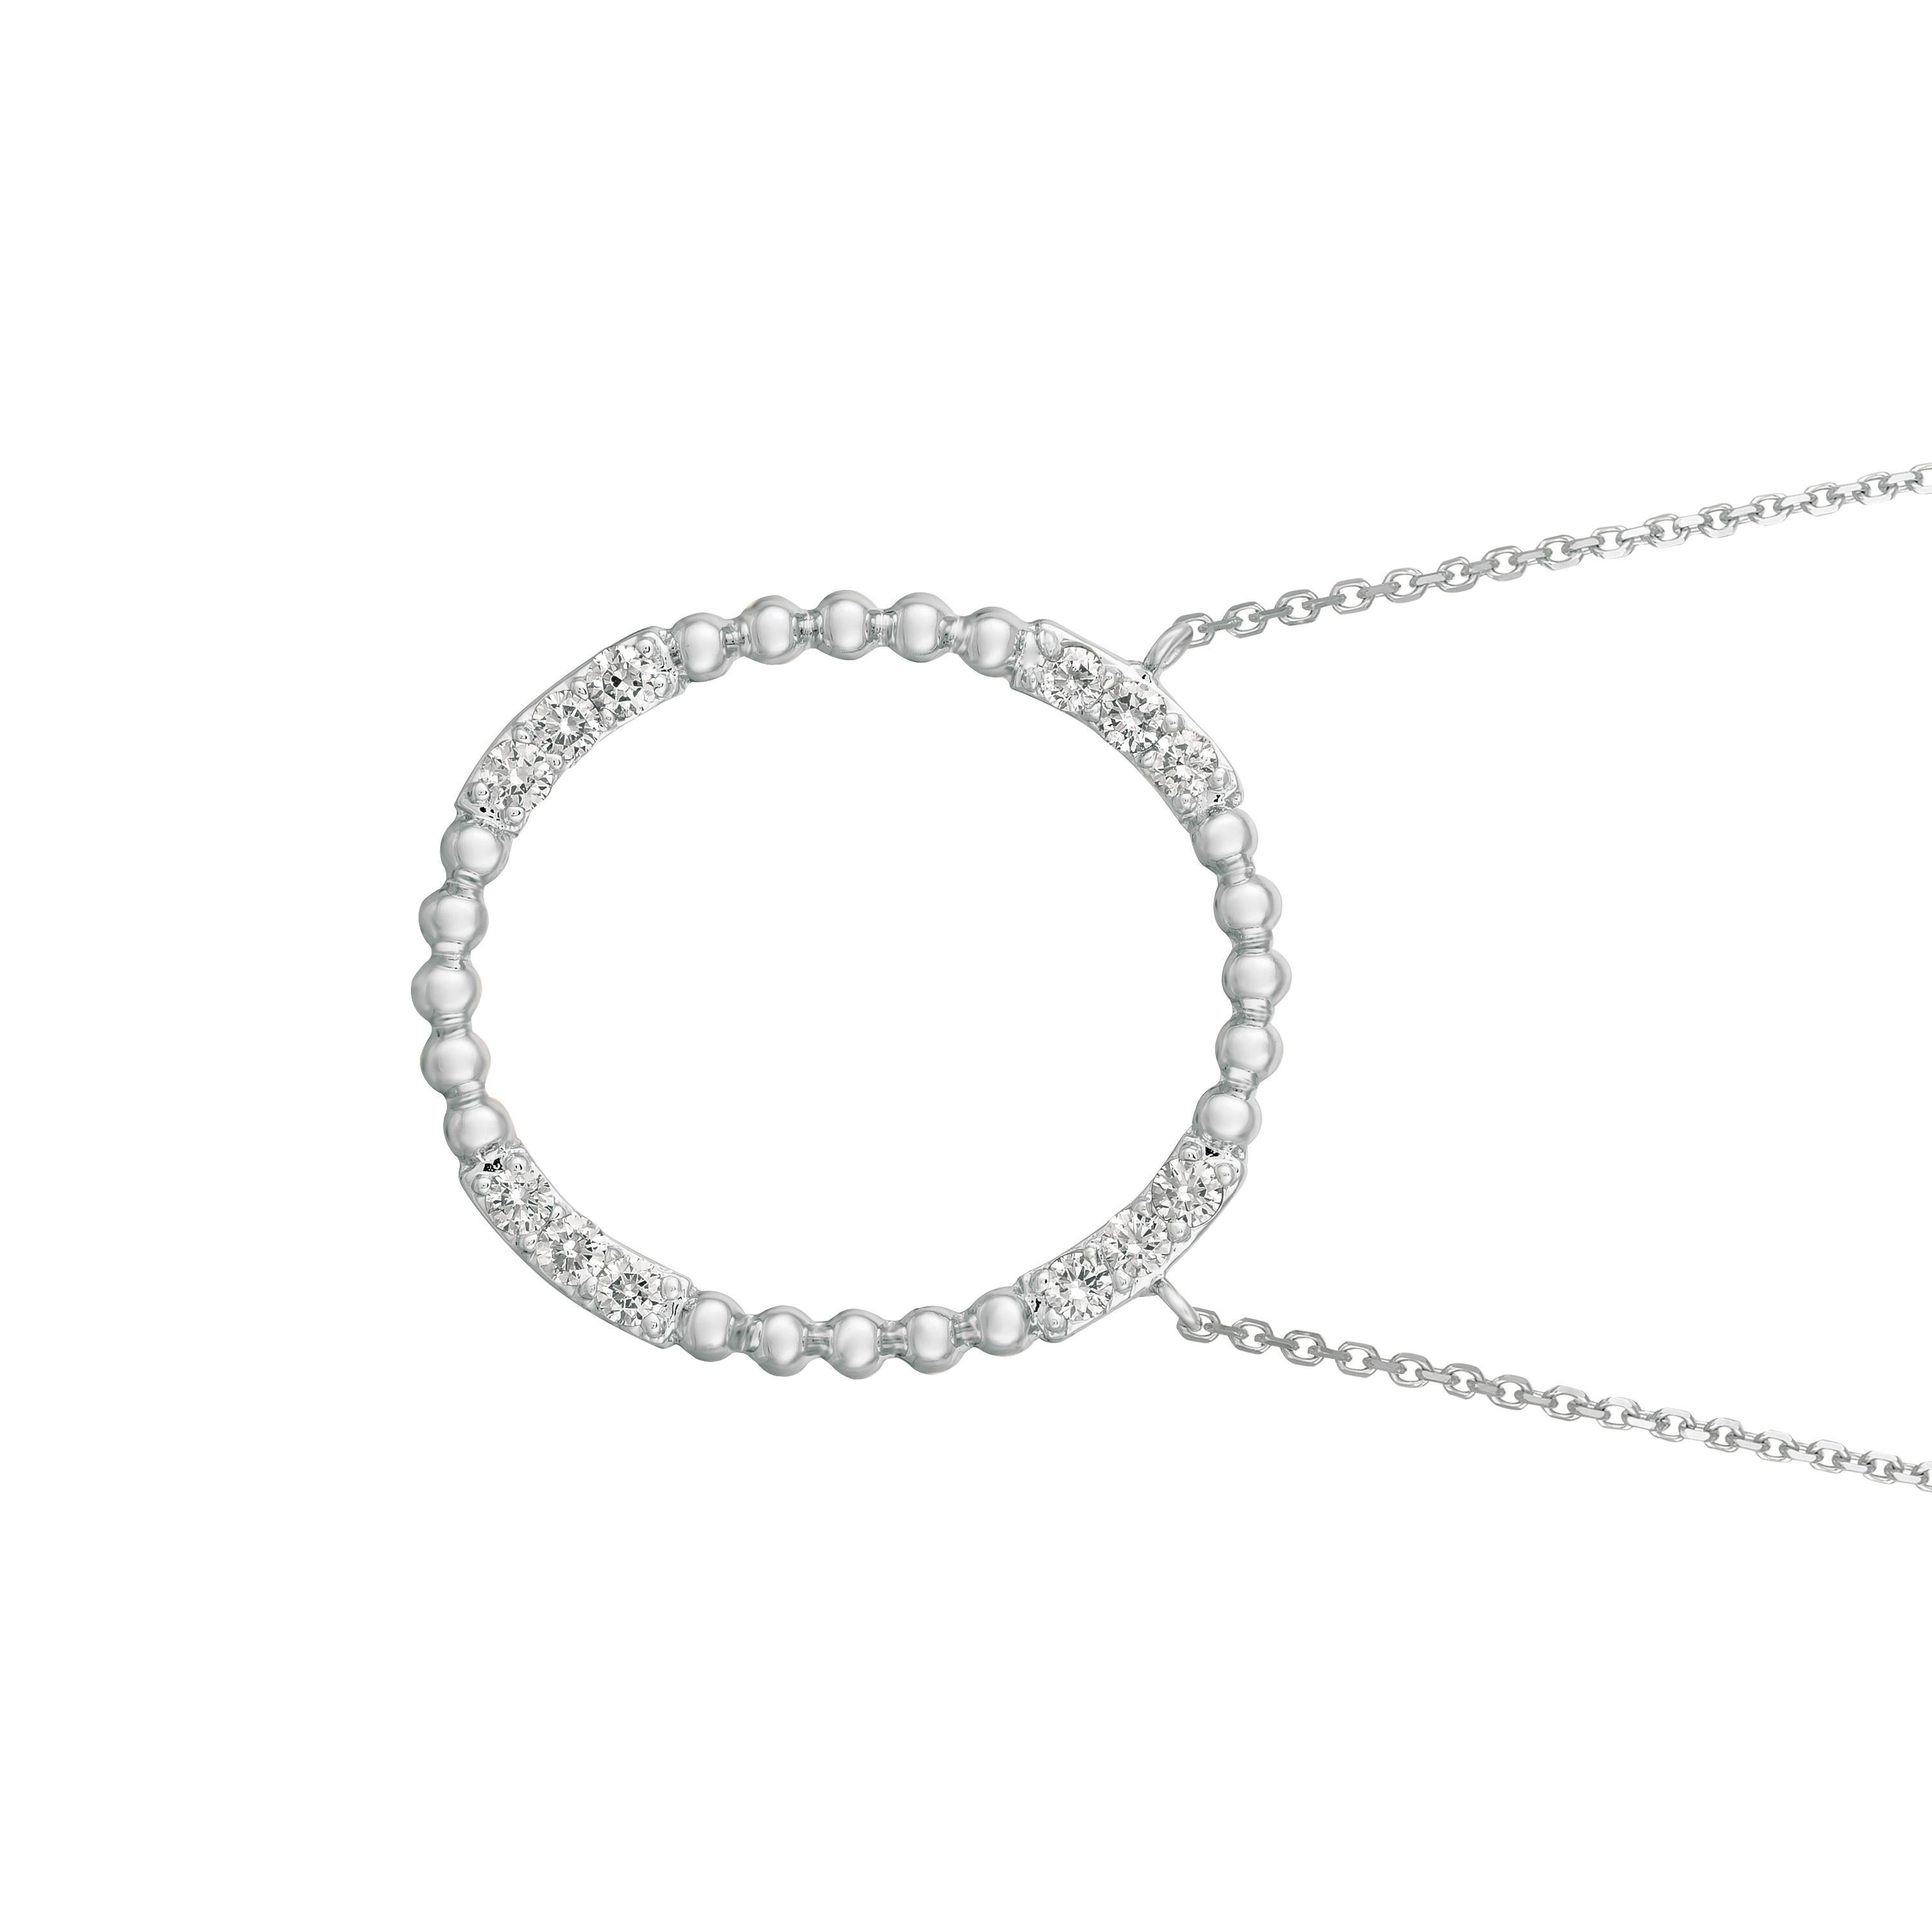 0.50 Carat Natural Diamond Circle Necklace 14K White Gold G SI 18 inches chain

100% Natural Diamonds, Not Enhanced in any way Round Cut Diamond Necklace
0.50CT
G-H
SI
14K White Gold, Pave style , 4.3 grams
1 1/8 inch in height, 1 inch in width
12